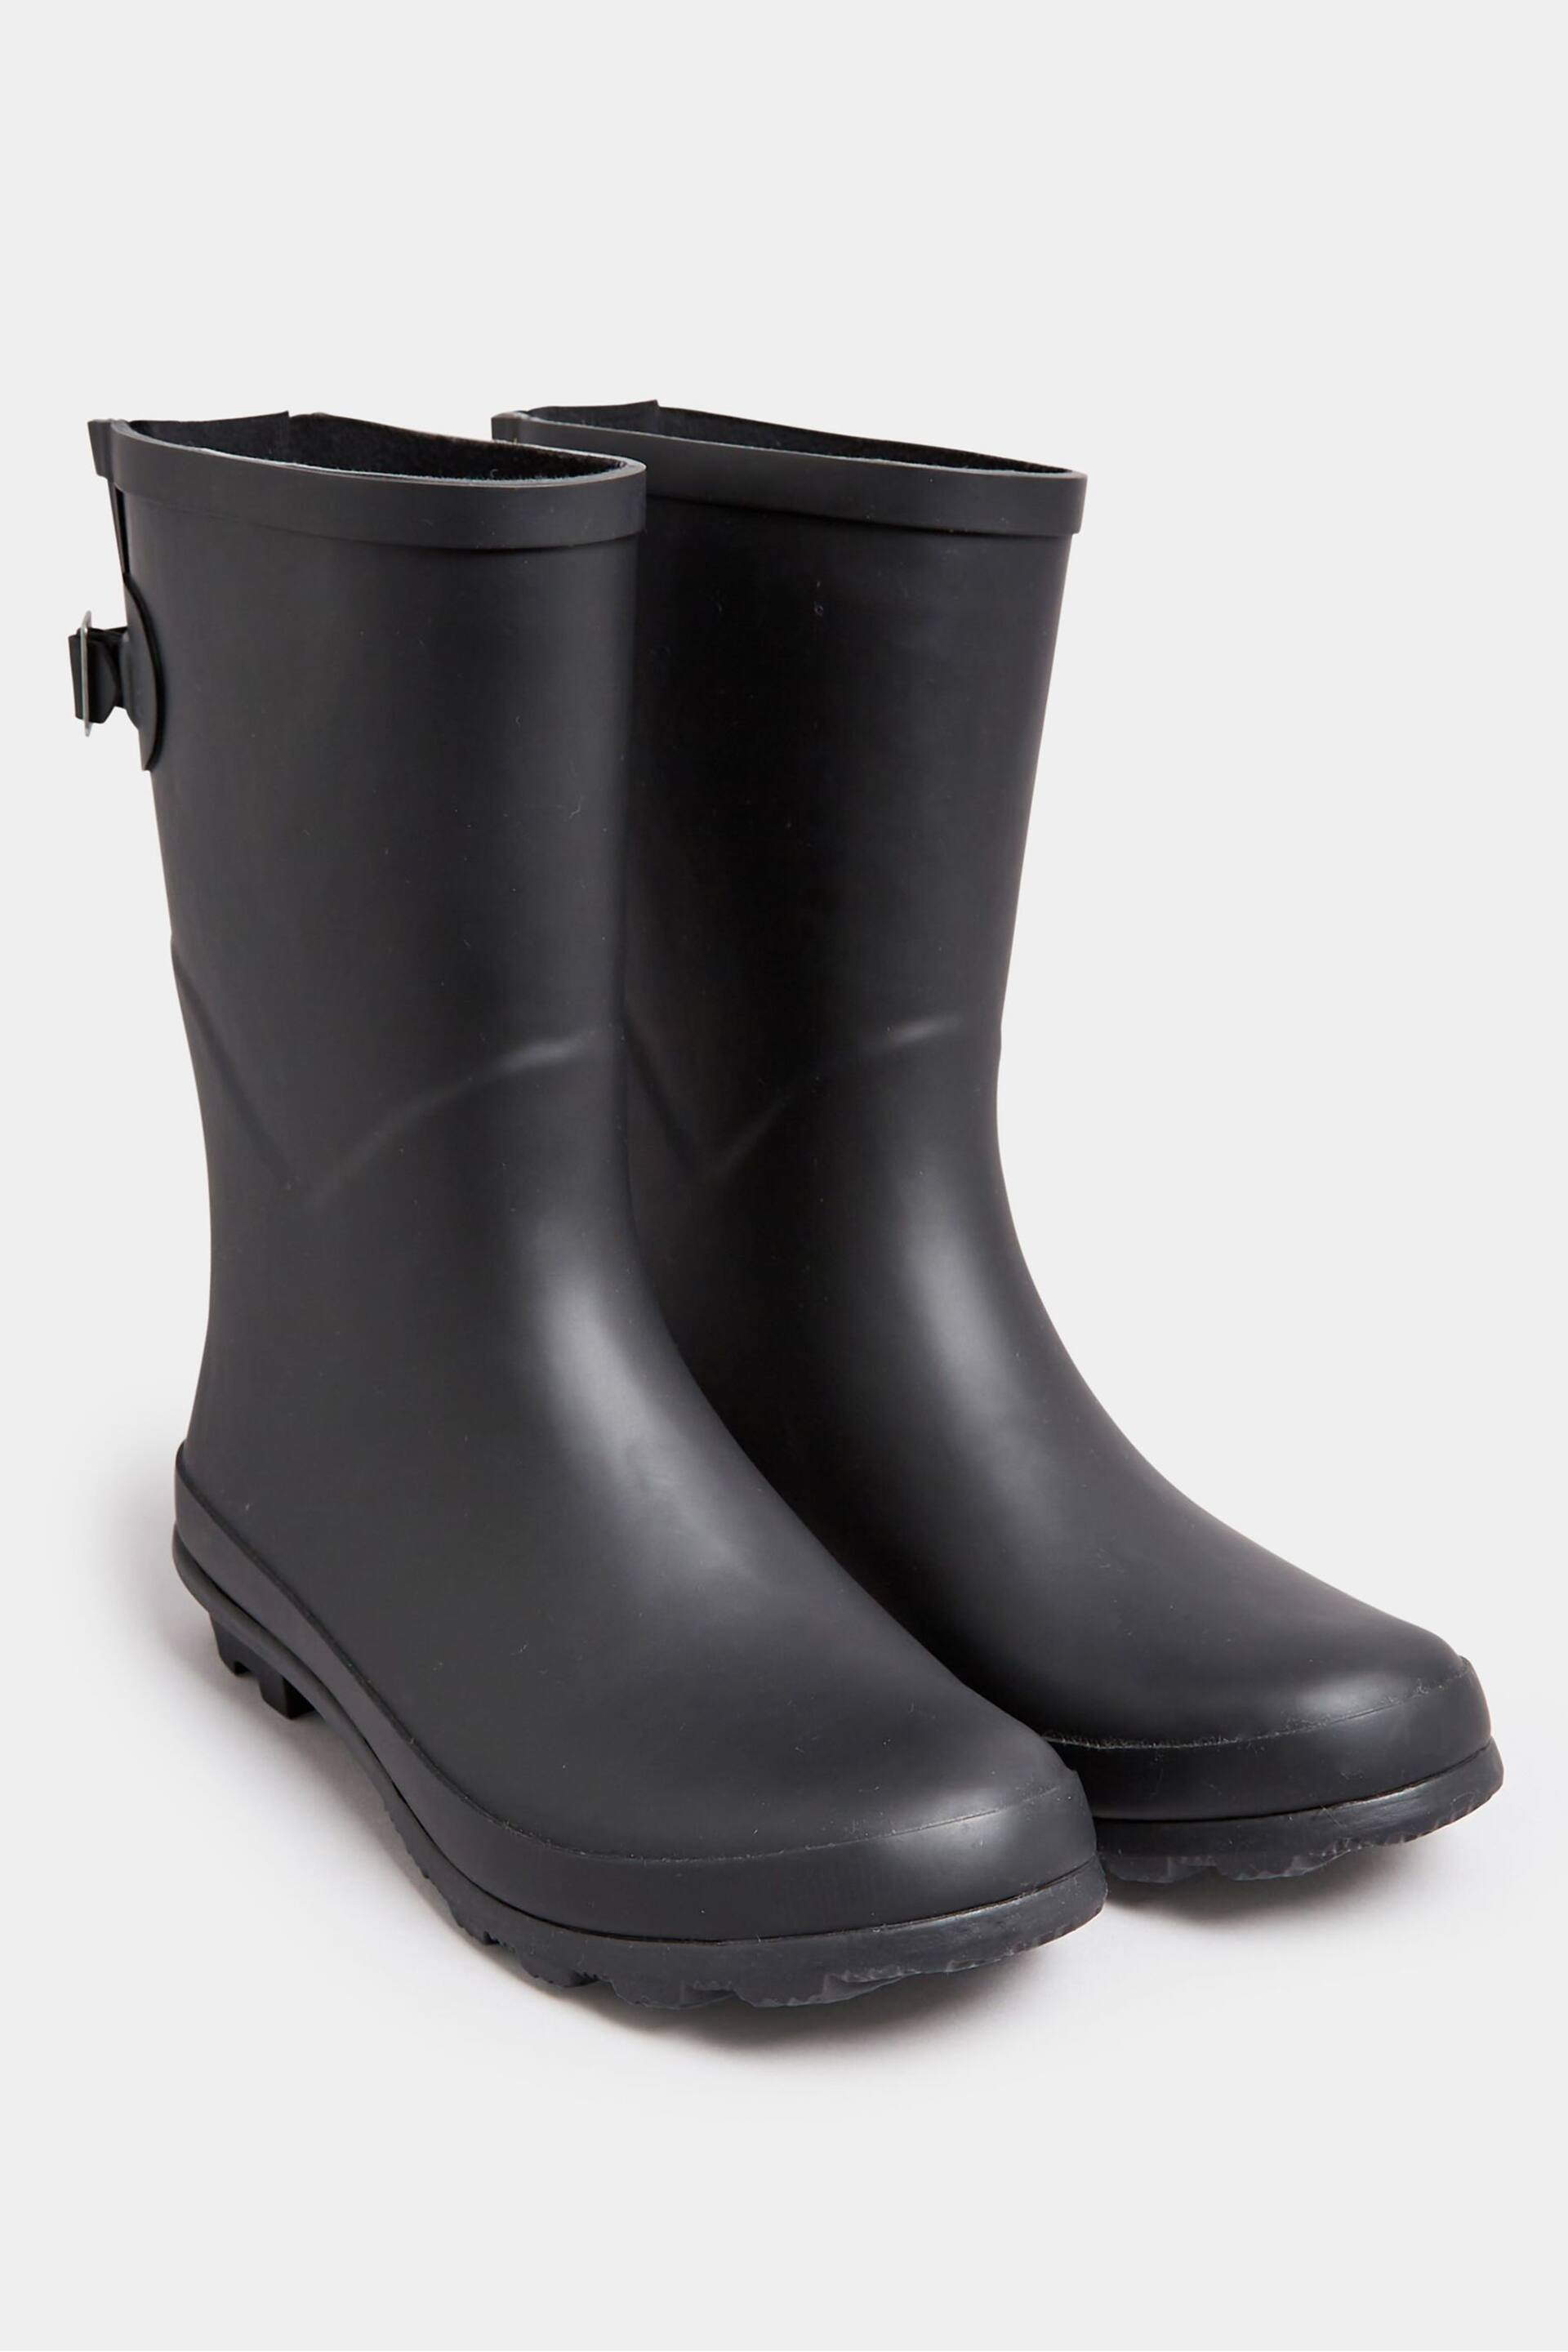 Yours Curve Black Wide Fit Mid Calf Adjustable Welly Boots - Image 2 of 4